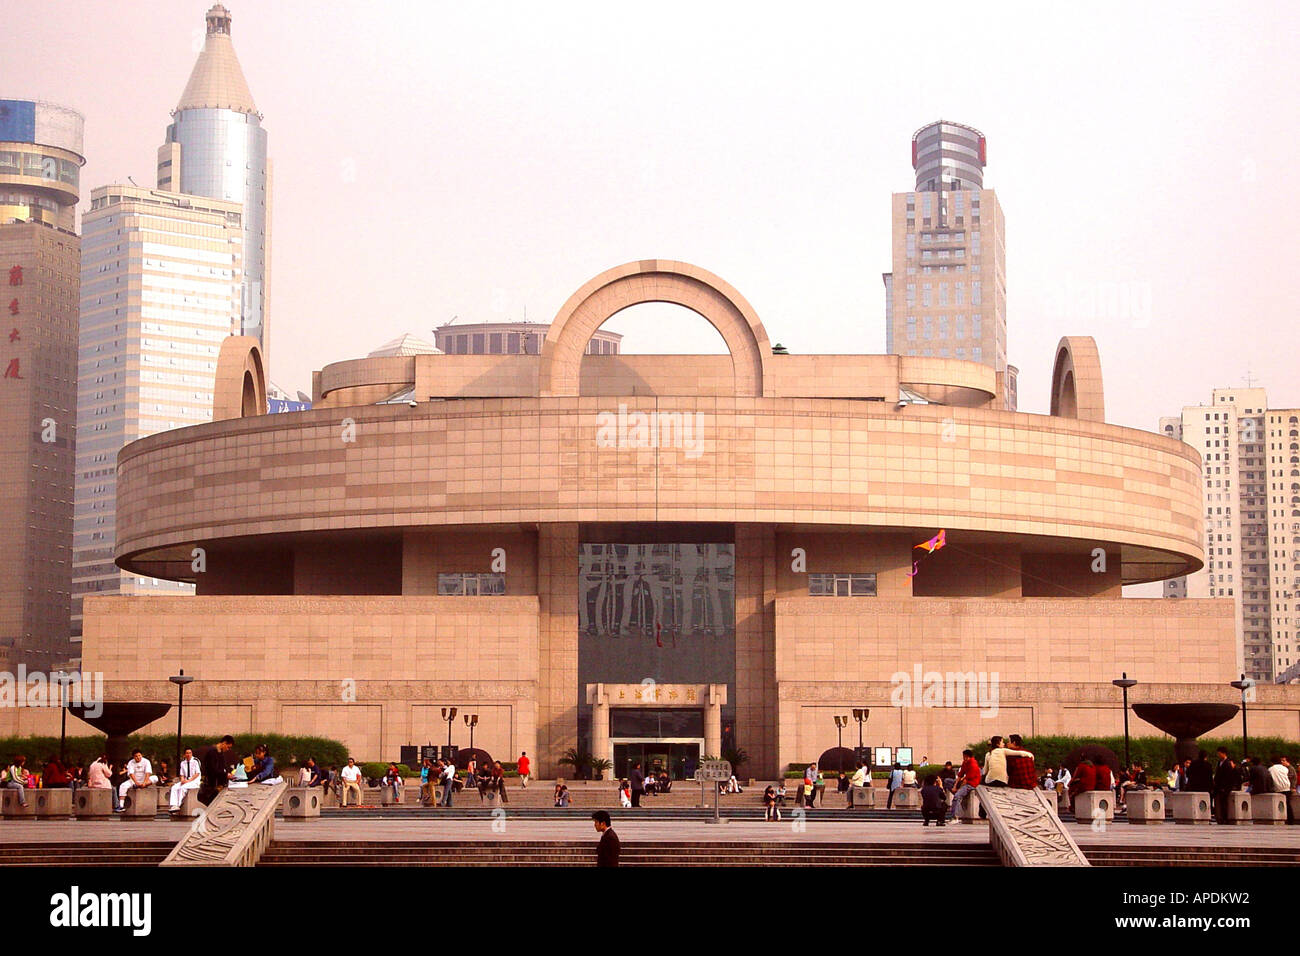 Shanghai museum, a museum of ancient Chinese art on People's Square, Huangpu District, Shanghai, China Stock Photo